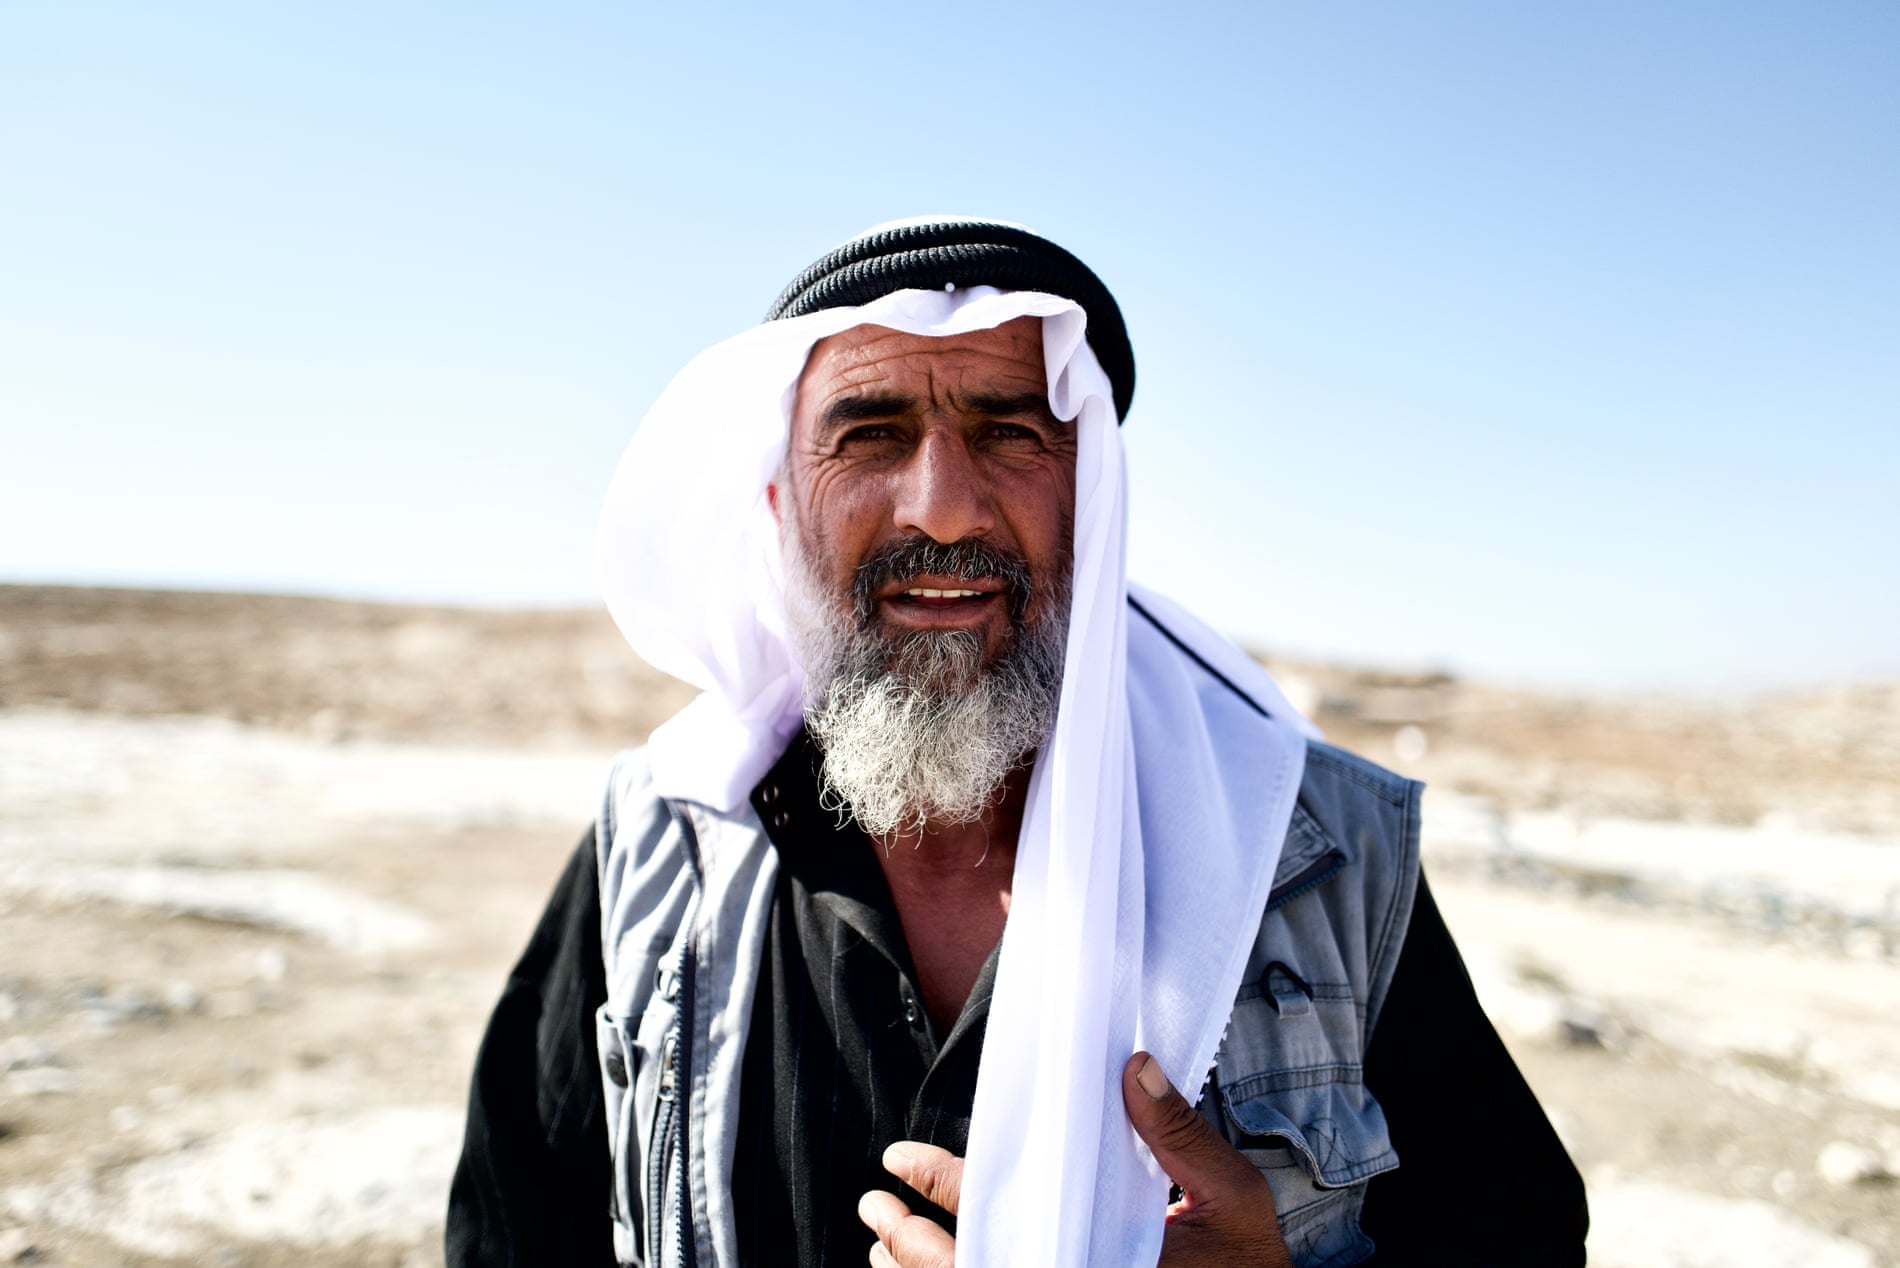 A man in a keffiyeh in a desert looks at the camera